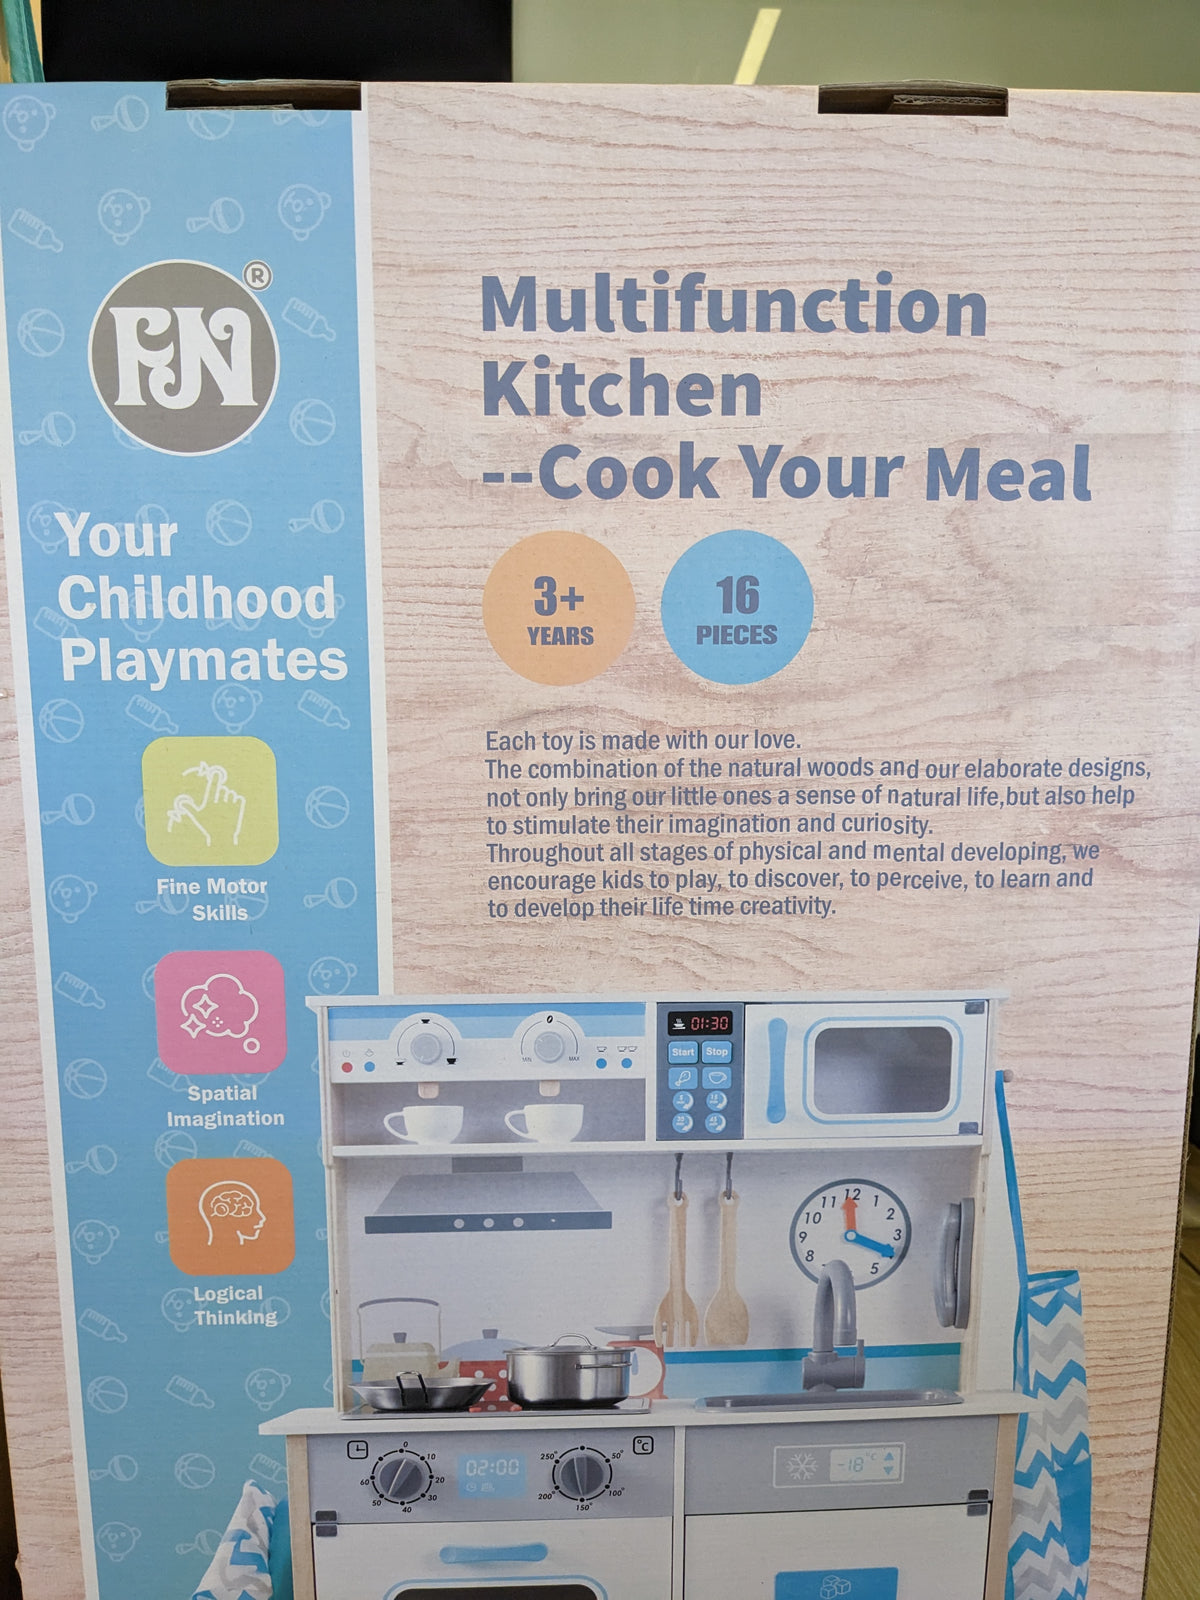 FN - Multifunction Kitchen -- Cook Your Meal